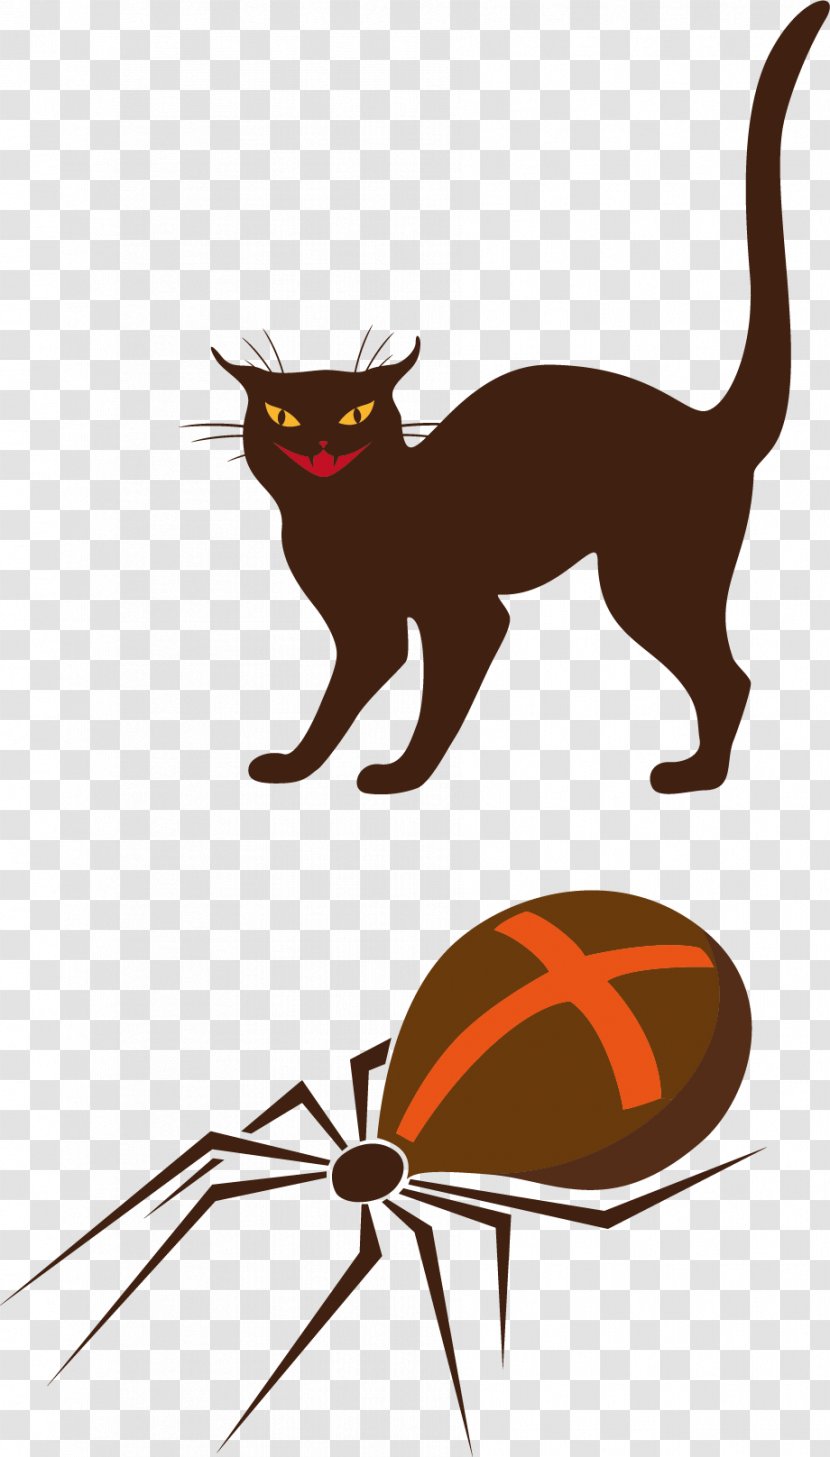 Whiskers Black Cat Halloween Clip Art - Vertebrate - Cartoon And Spider Material Transparent PNG